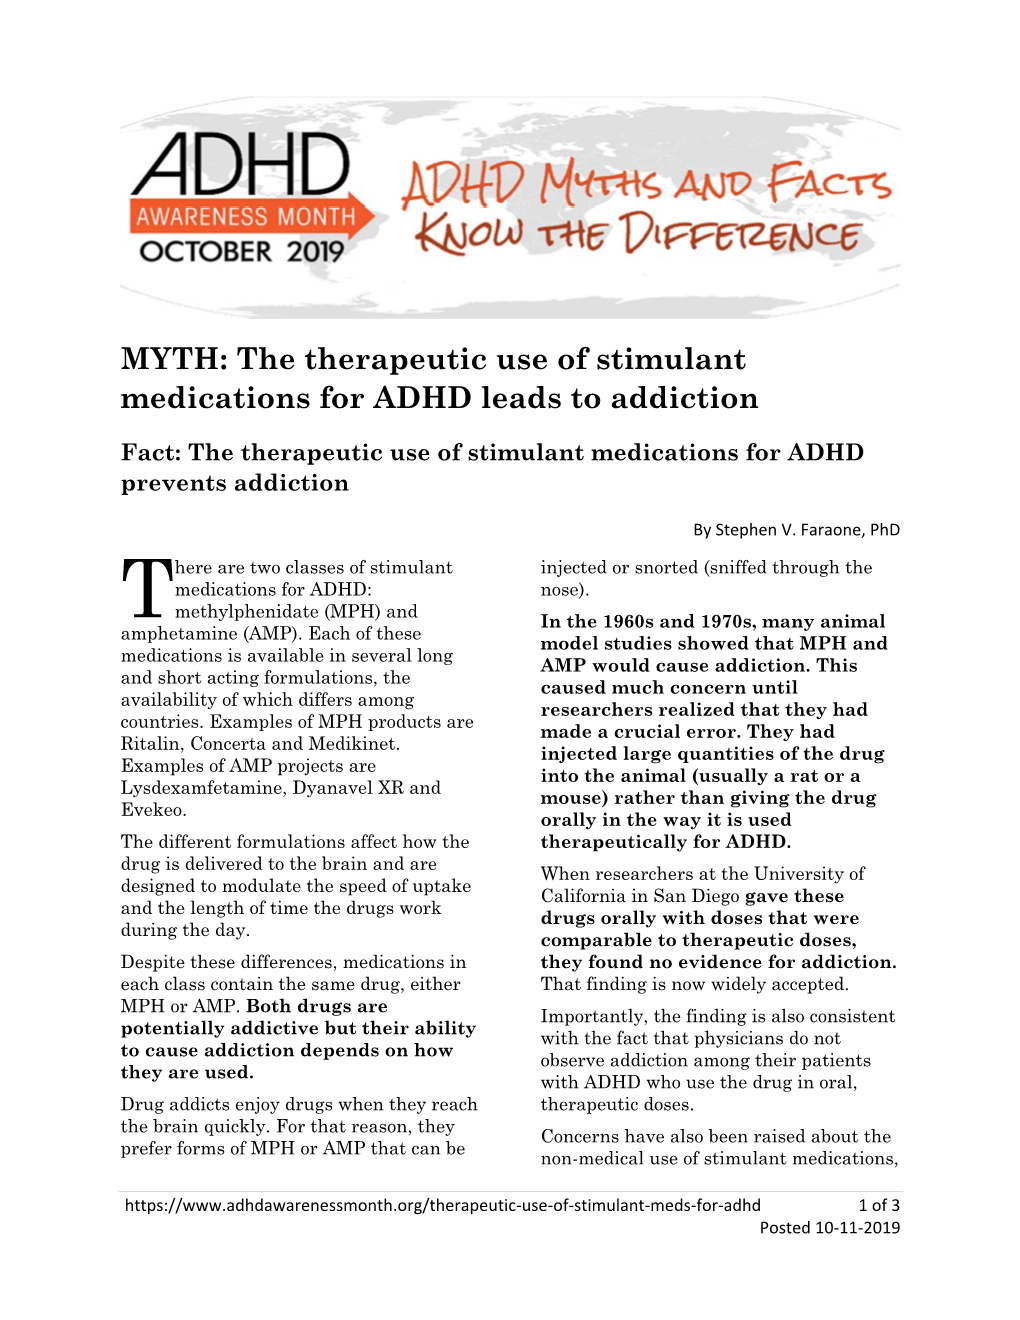 The Therapeutic Use of Stimulant Medications for ADHD Leads to Addiction